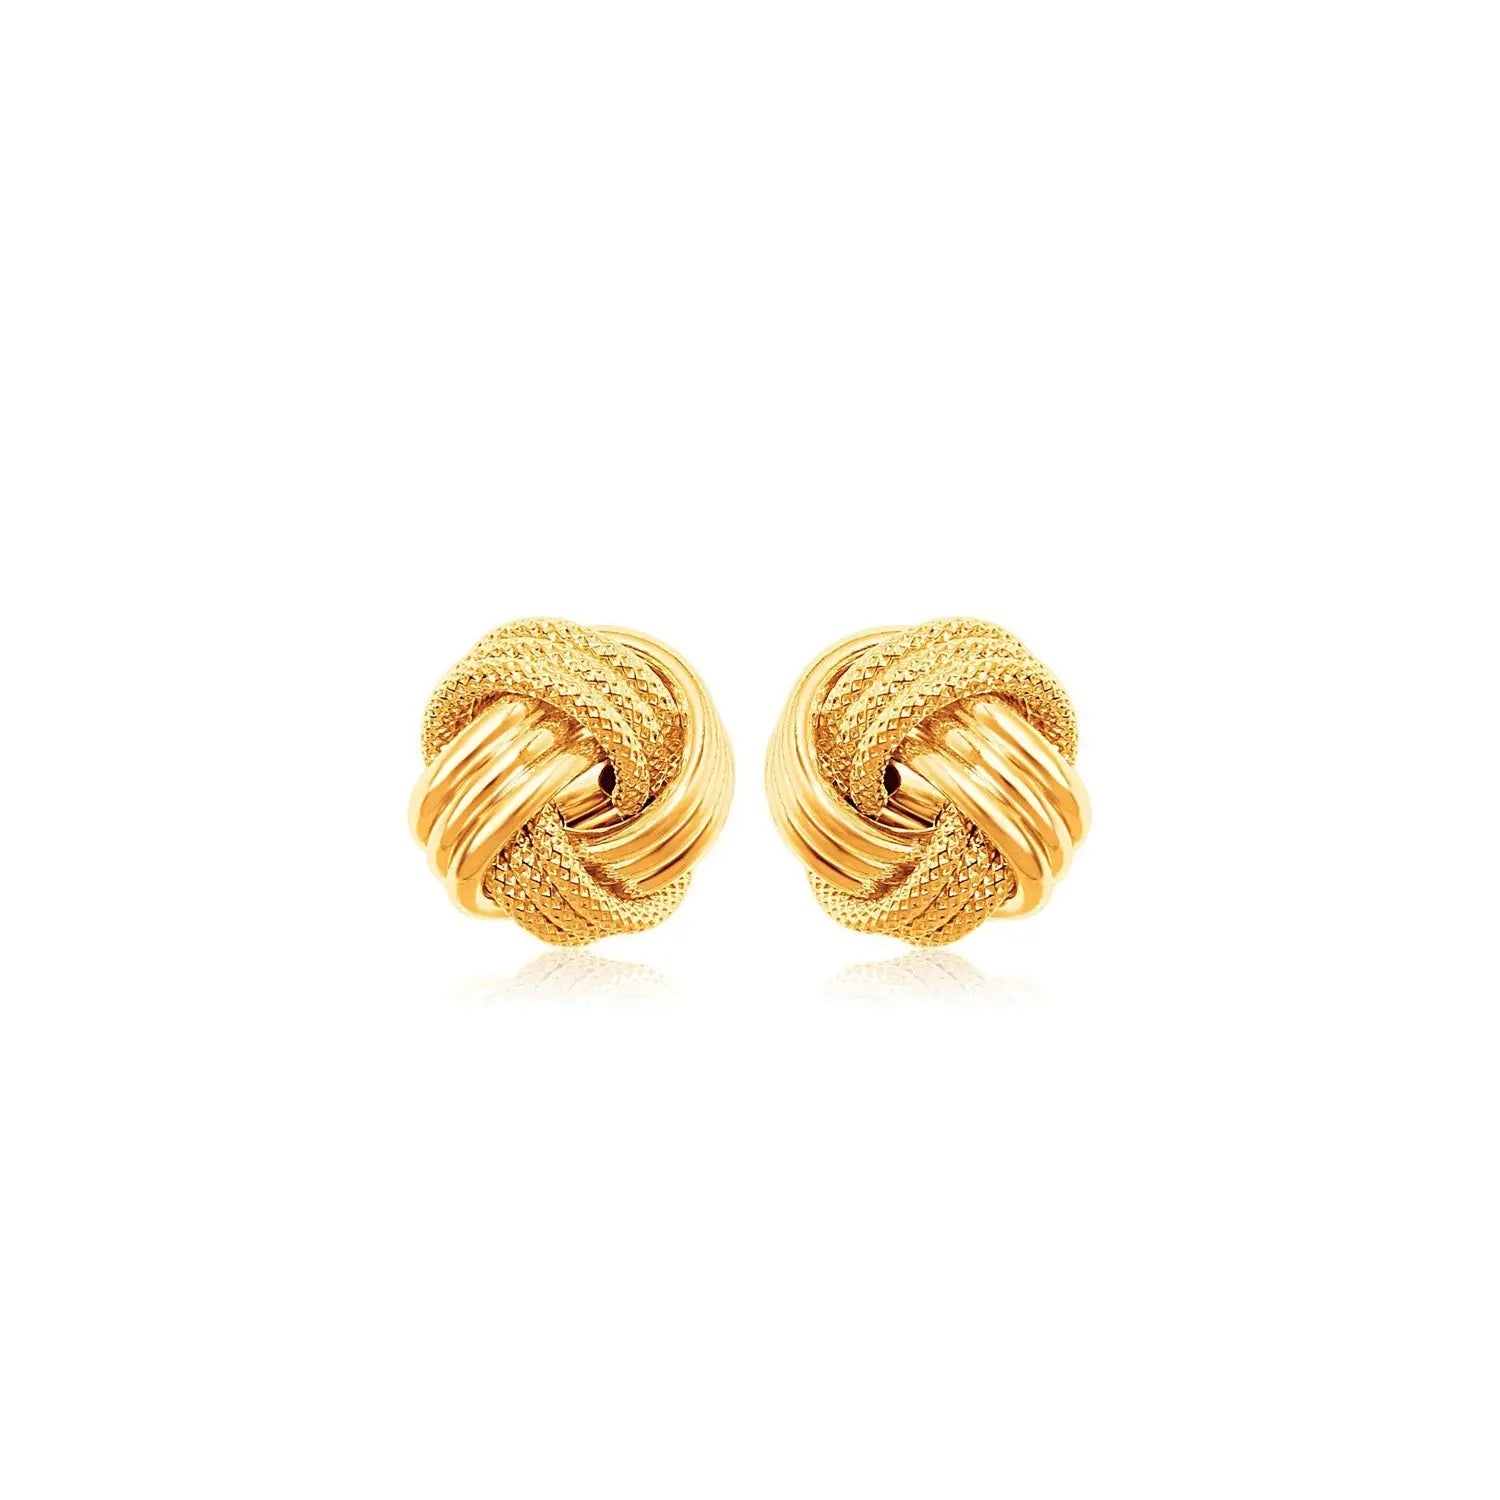 10k Yellow Gold Love Knot with Ridge Texture Earrings 